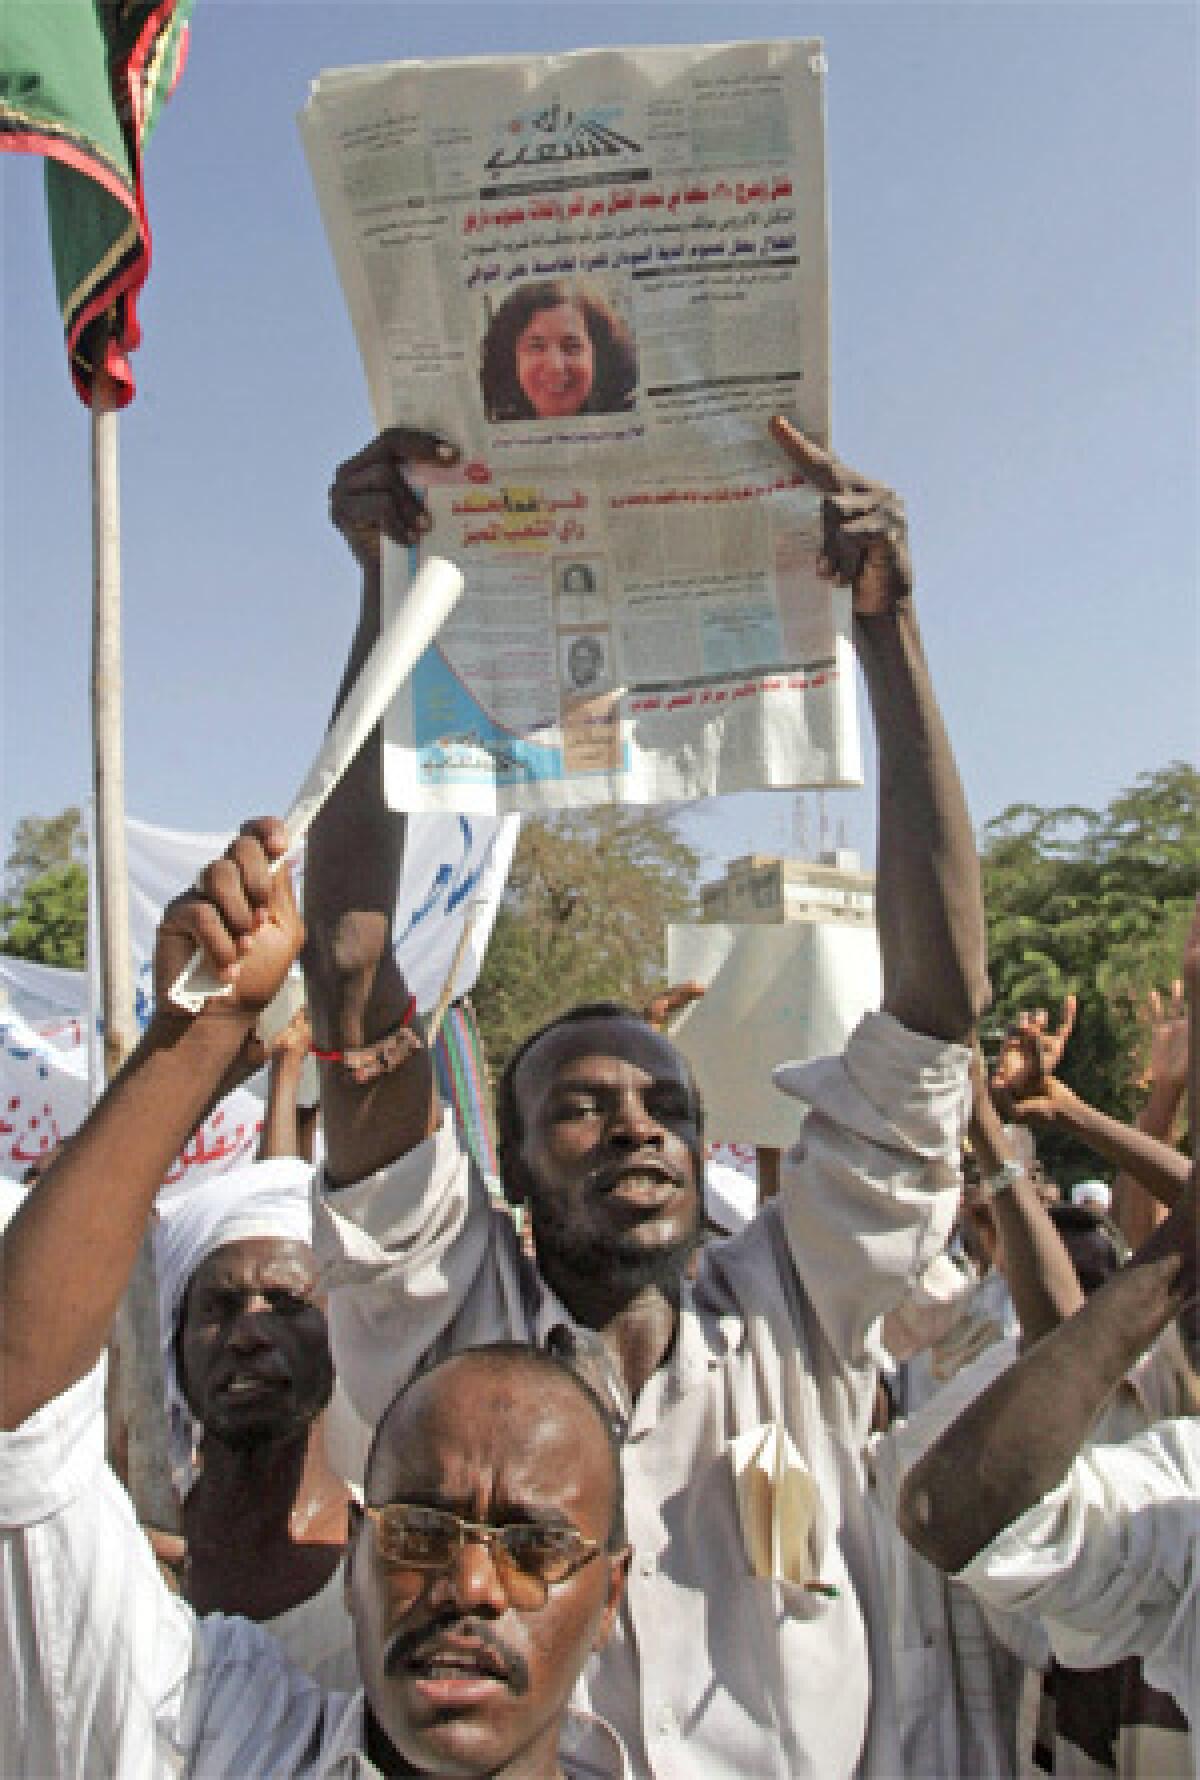 ANGER IN KHARTOUM: A Sudanese demonstrator holds a newspaper with a photo of Briton Gillian Gibbons, who was convicted of insulting Islam. Some wanted her executed.